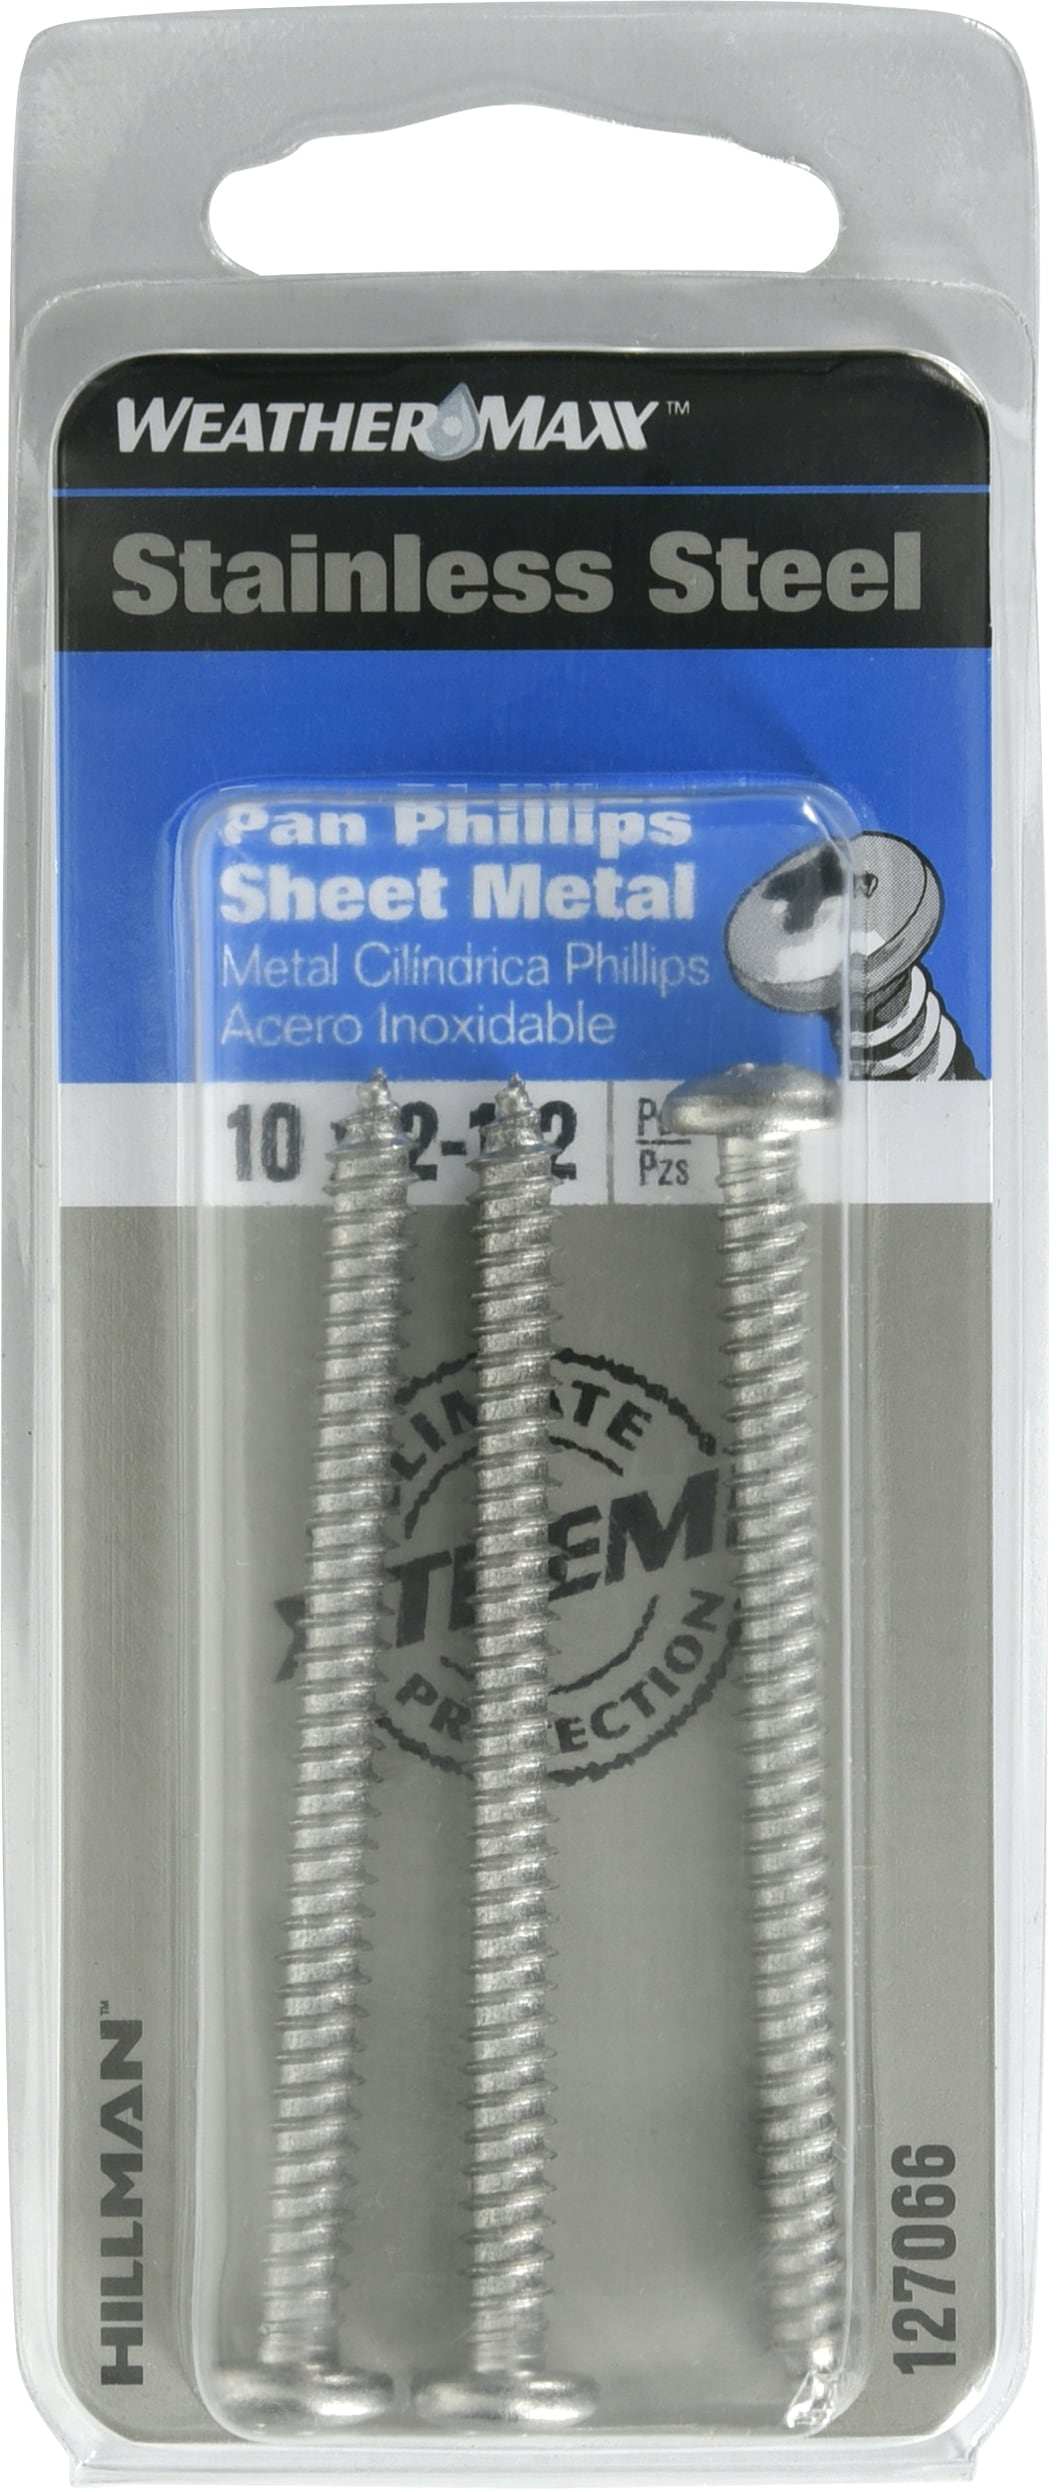  The Hillman Group 44443 10 x 1-Inch White Pan Head Phillips  Sheet Metal Screw, Stainless Steel, 12-Pack : Industrial & Scientific